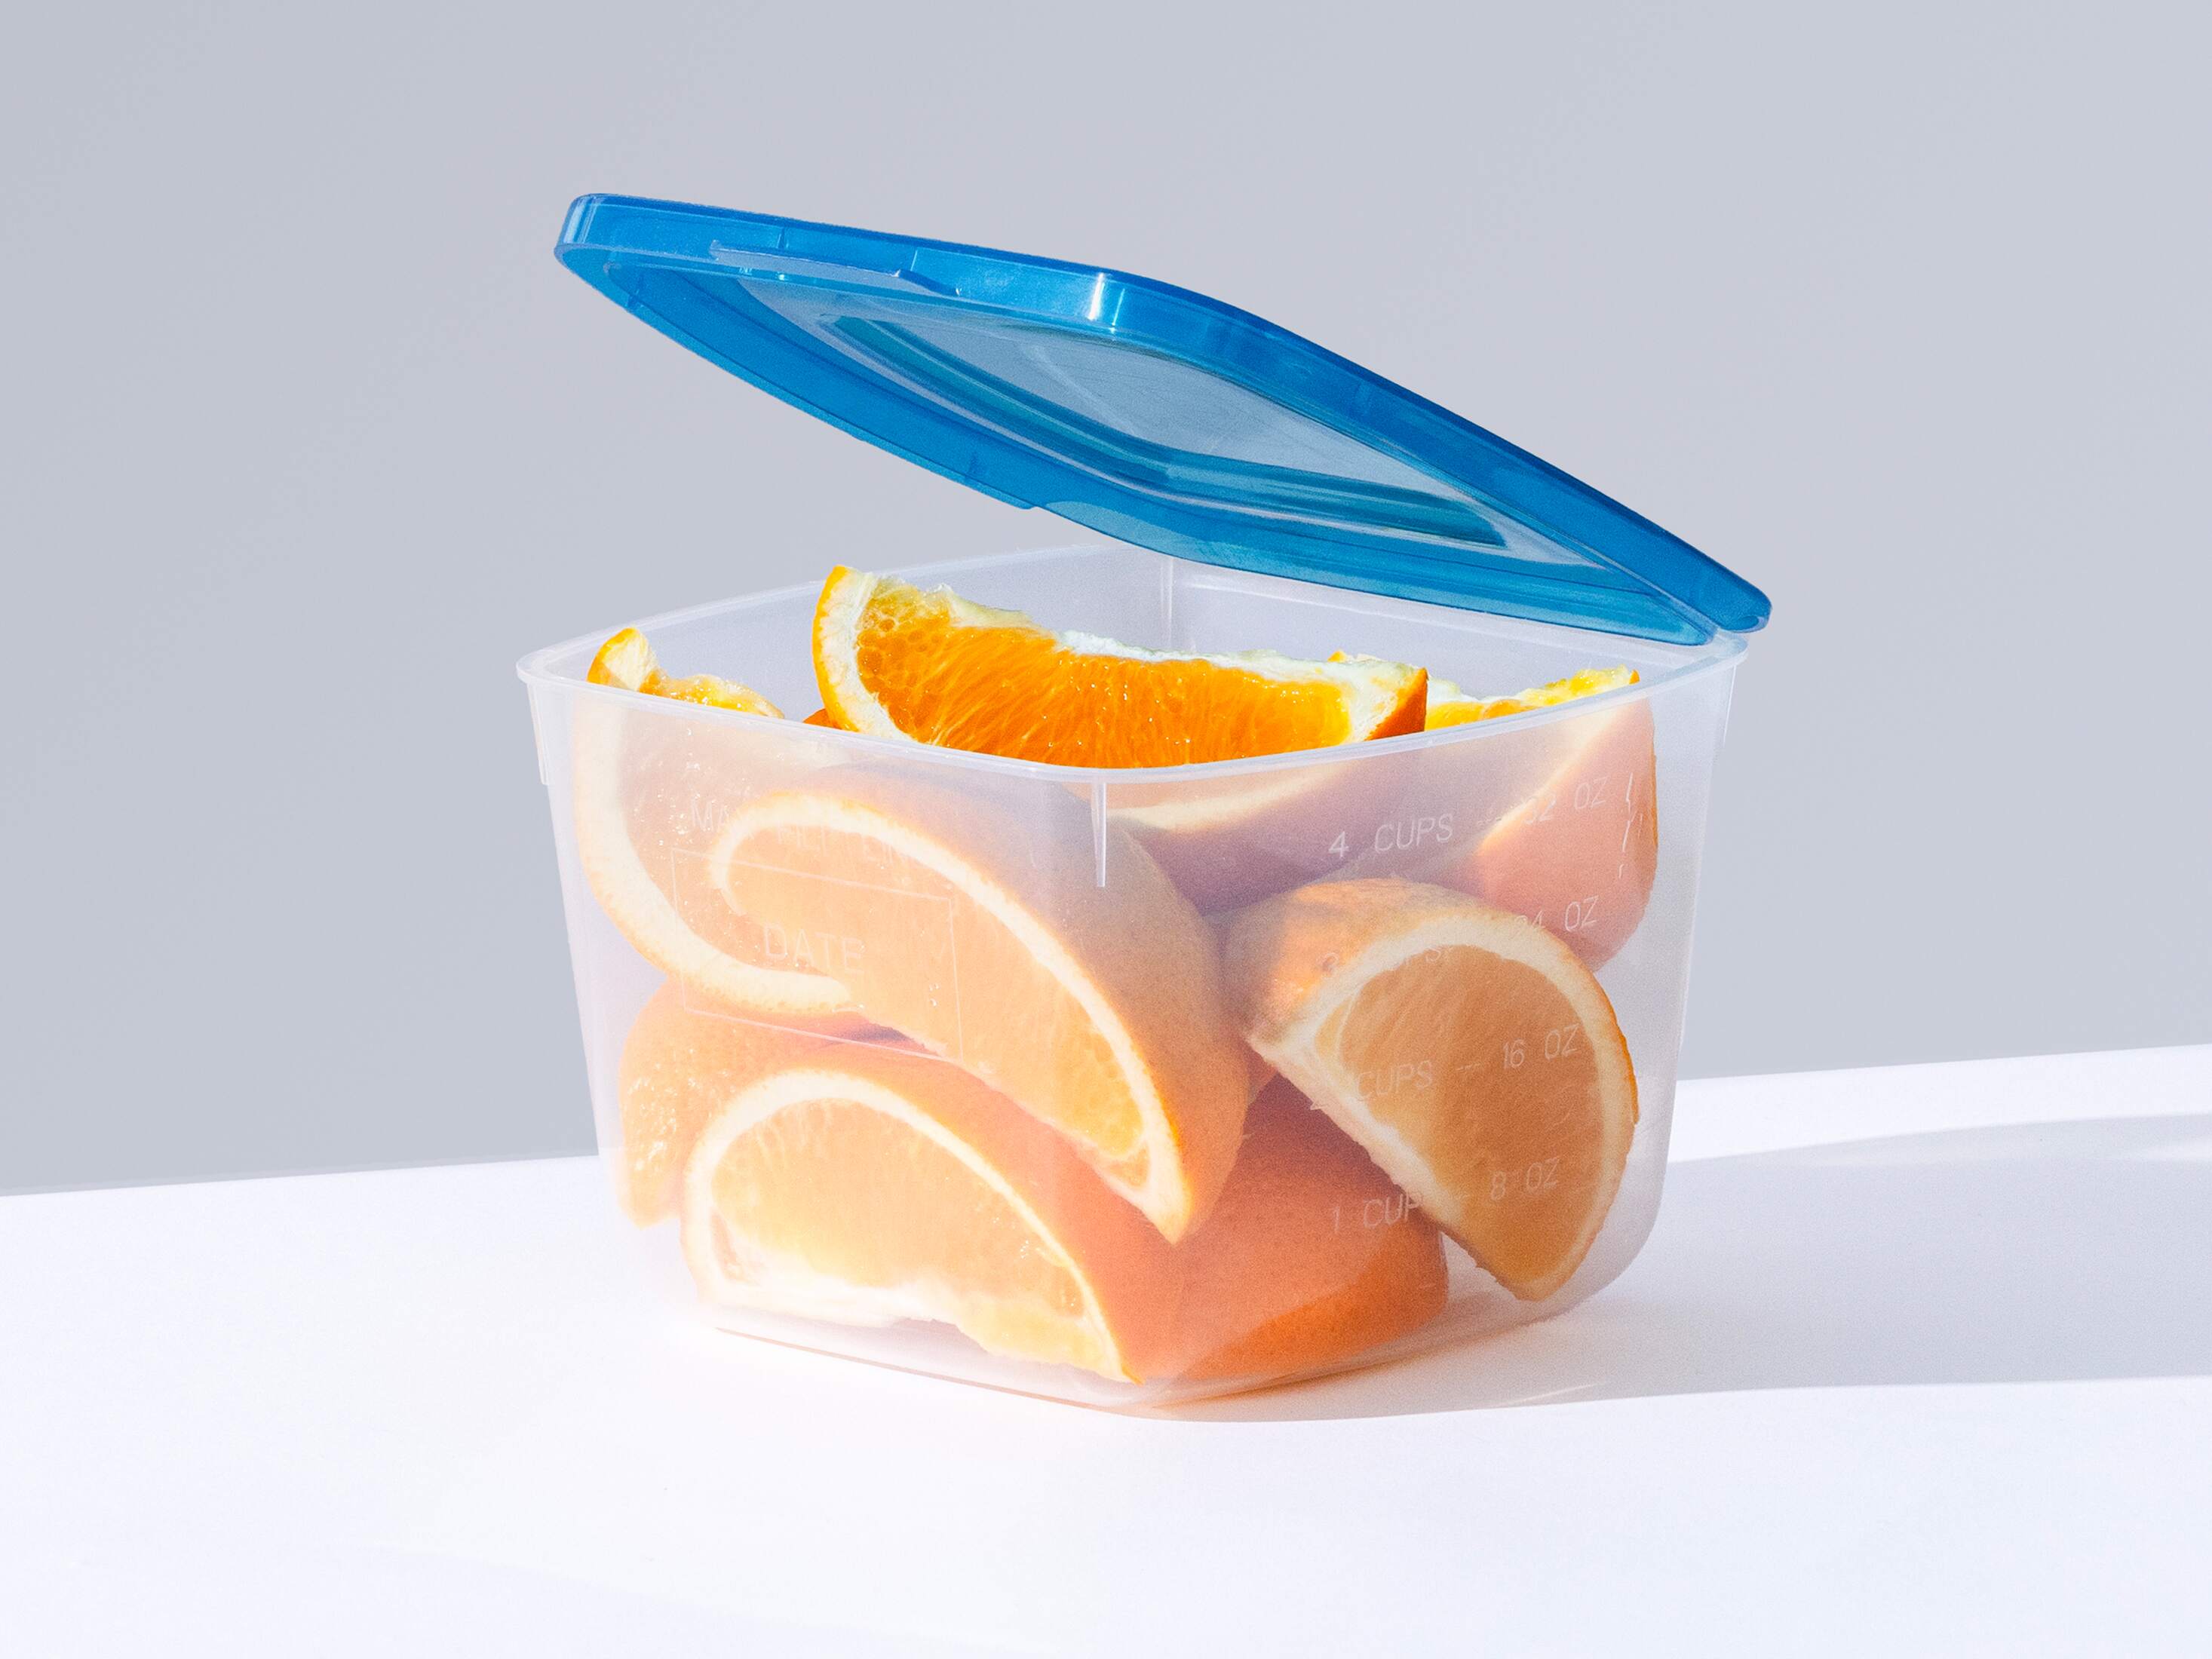 Mr. Lid – Food storage containers